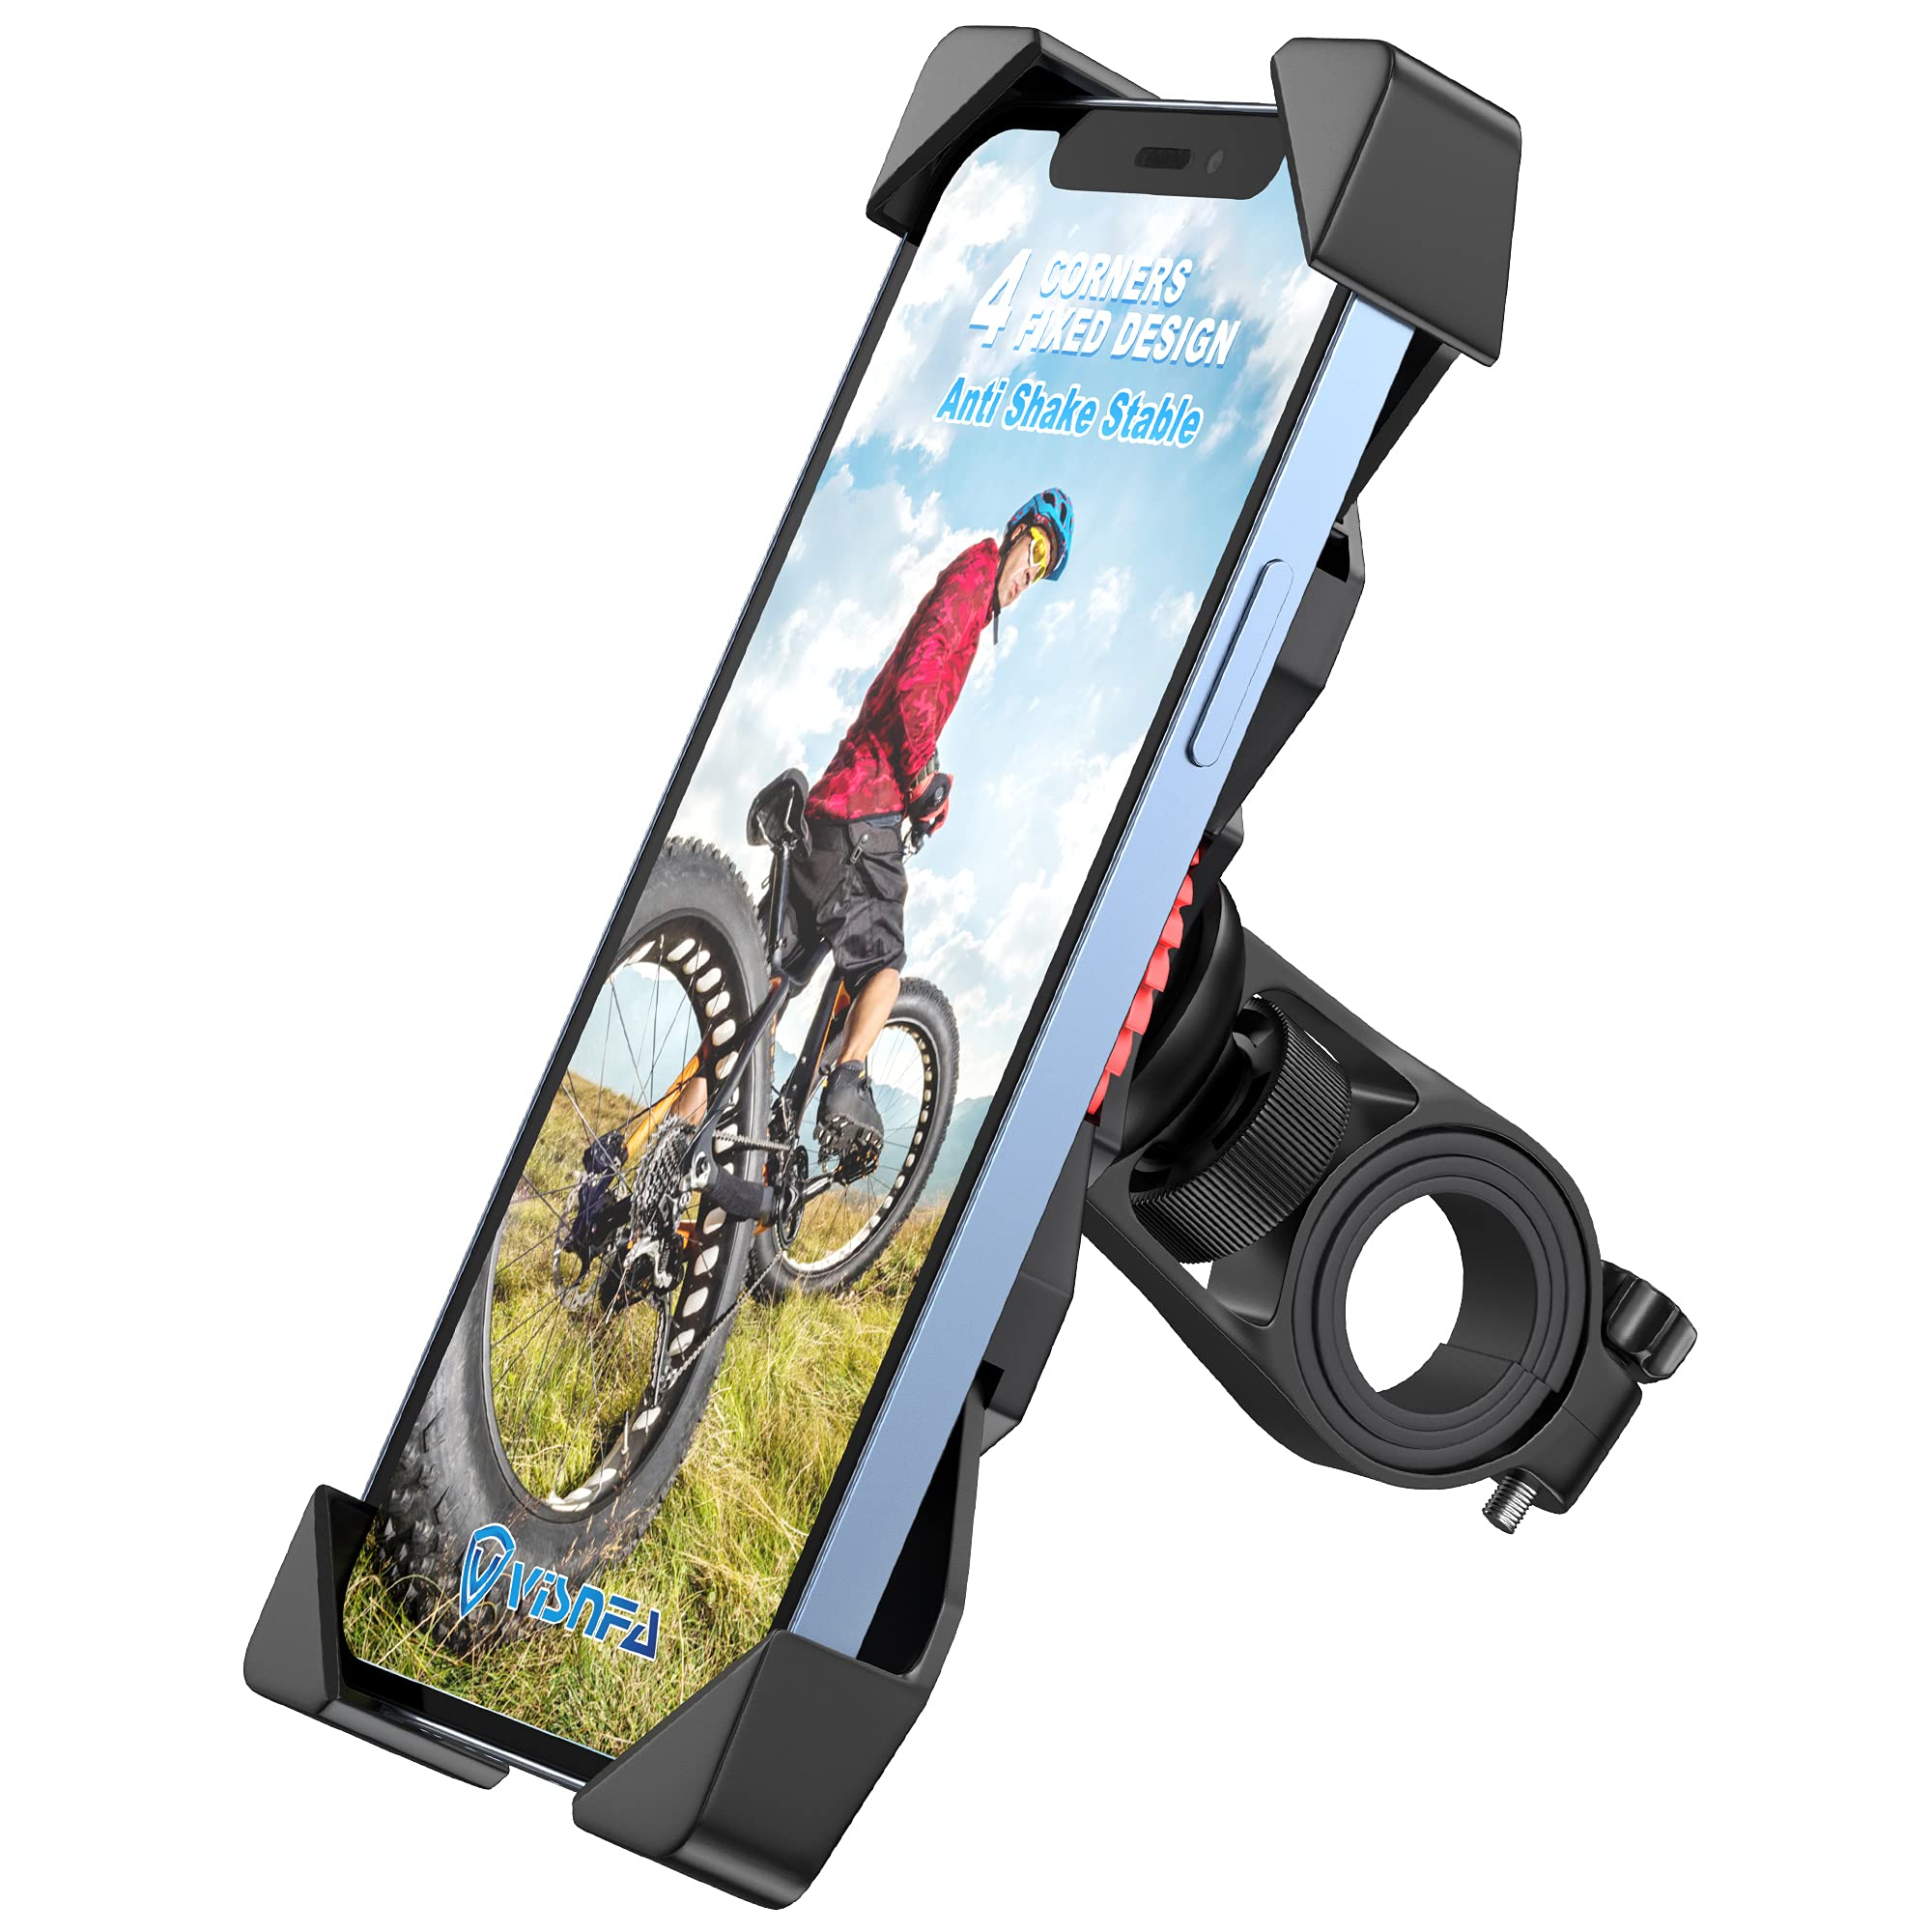 visnfa Bike Phone Mount Anti Shake and Stable Cradle Clamp with 360  Rotation Bicycle Phone mount / Bike Accessories / Bike Phone Holder for  iPhone Android GPS Other Devices Between 3.5 to 6.5 inches